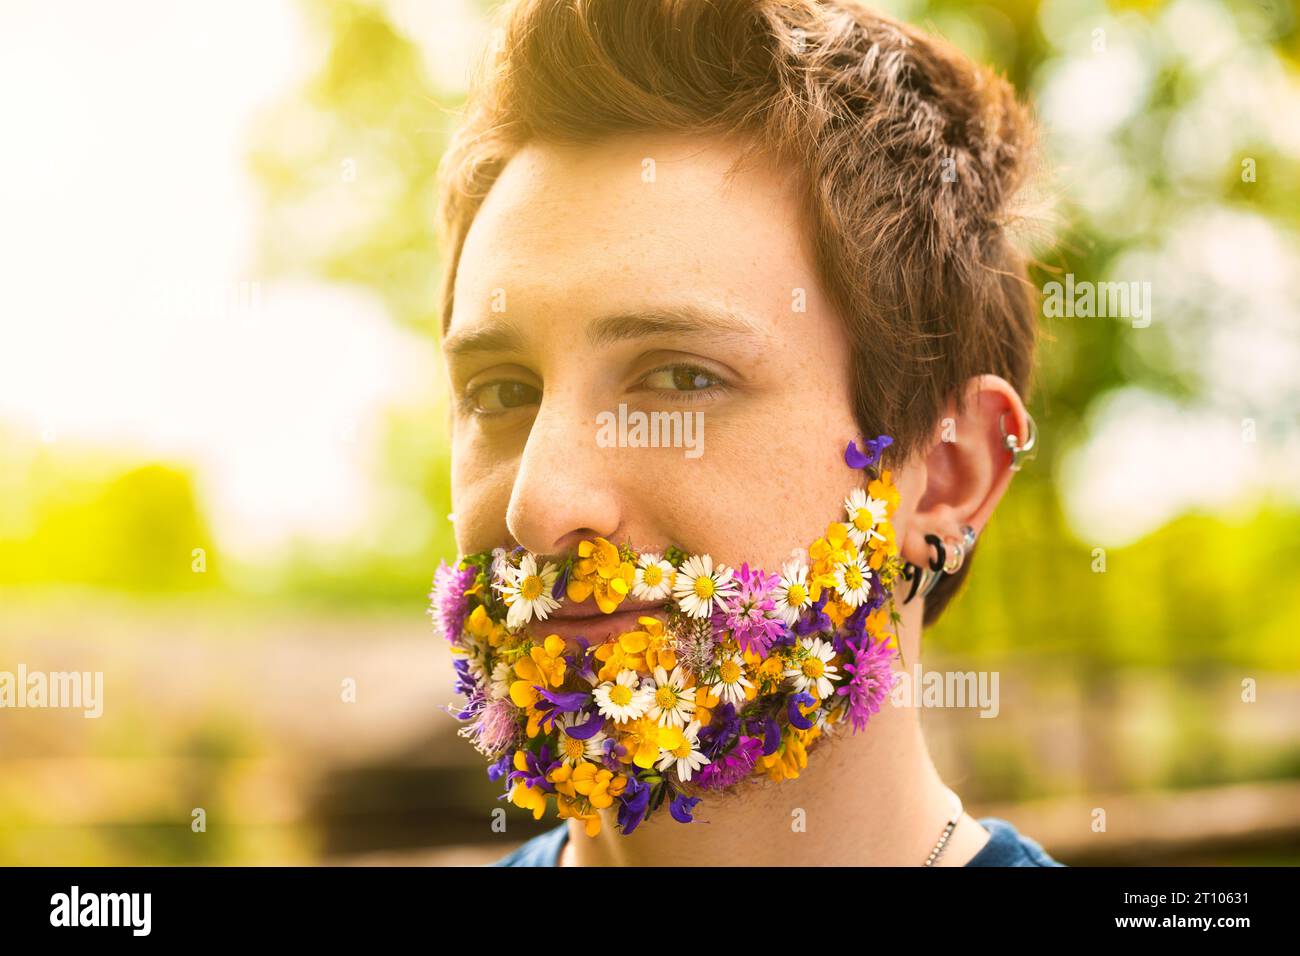 Among lush foliage, a man's unique trait shines: floral facial hair. This affinity, whether literal or symbolic, conveys his deep-rooted passion for t Stock Photo